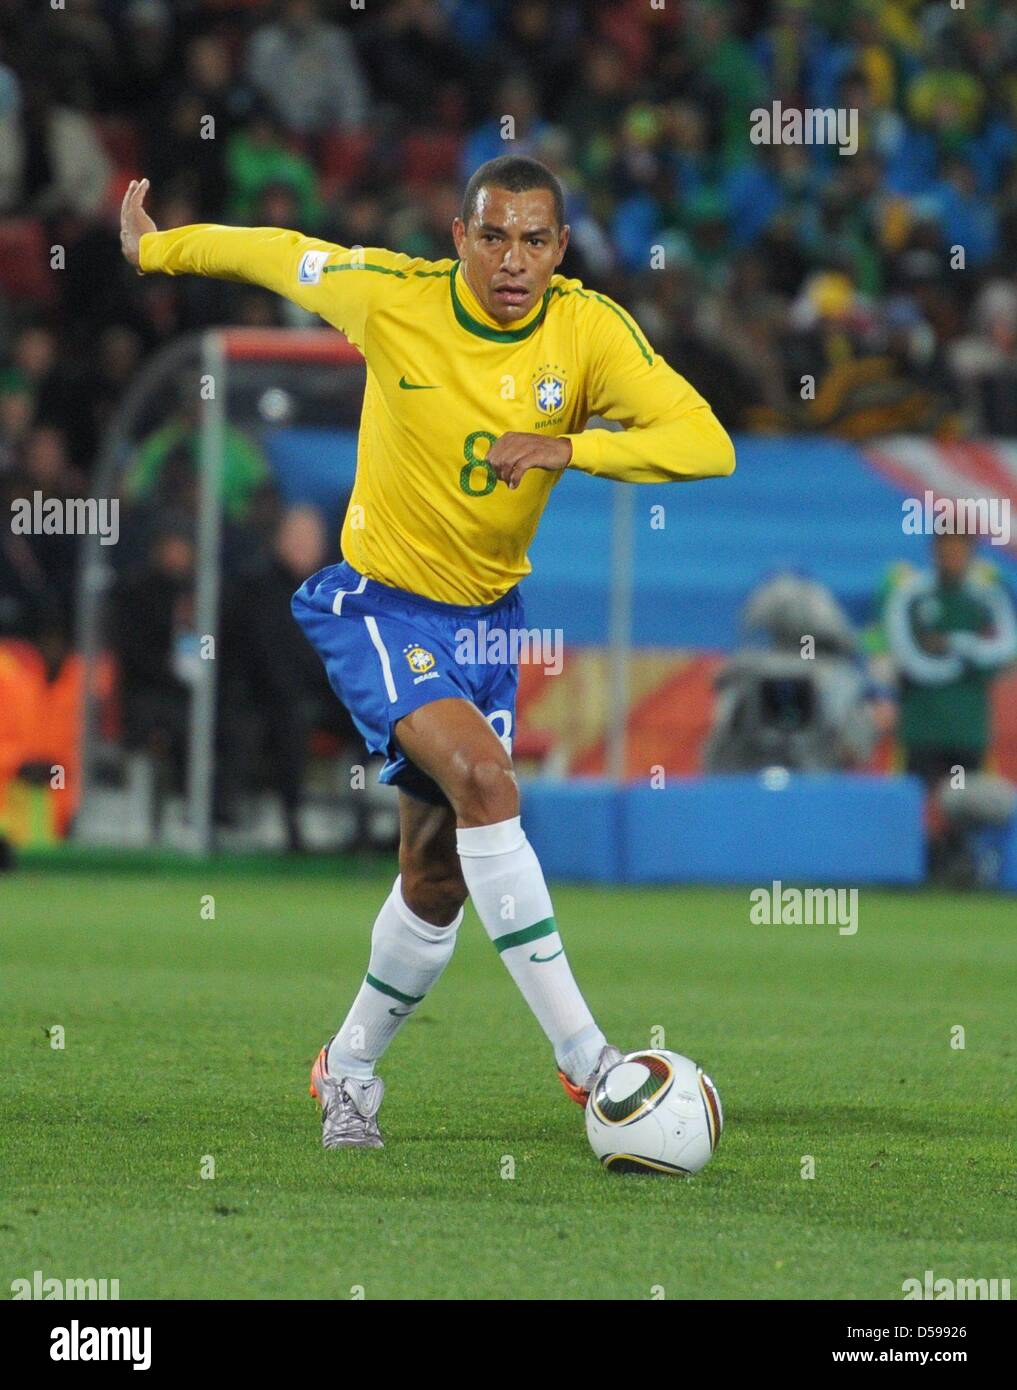 Gilberto Silva of Brazil controls the ball during the FIFA World Cup 2010 group G match between Brazil and North Korea at Ellis Park Stadium in Johannesburg, South Africa 15 June 2010. Photo: Ronald Wittek dpa - Please refer to http://dpaq.de/FIFA-WM2010-TC Stock Photo